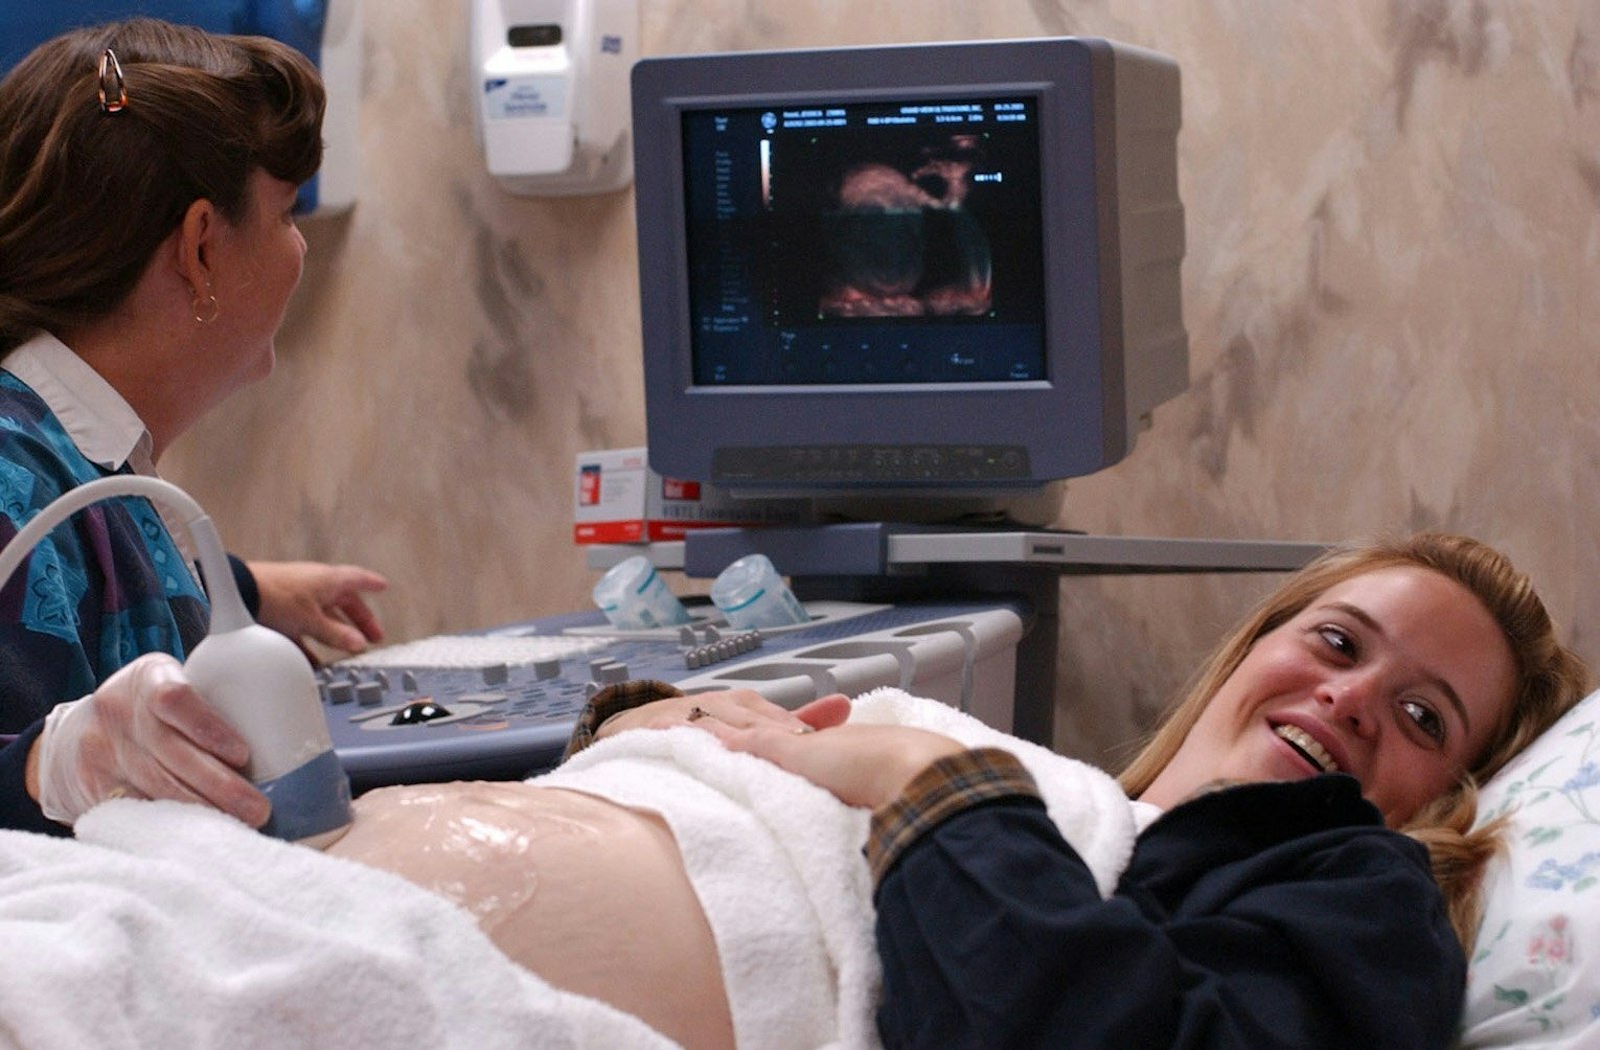 Jessica Kasel of Woodbury, Minn., catches sight of an ultrasound image of her daughter, Emma, on a monitor (out of view) at Grand View Ultrasound in St. Paul. Sonographer Ronda Rosenthal operates the machine, which provides highly detailed images of babies in the womb. (CNS photo by Dave Hrbacek, The Catholic Spirit)